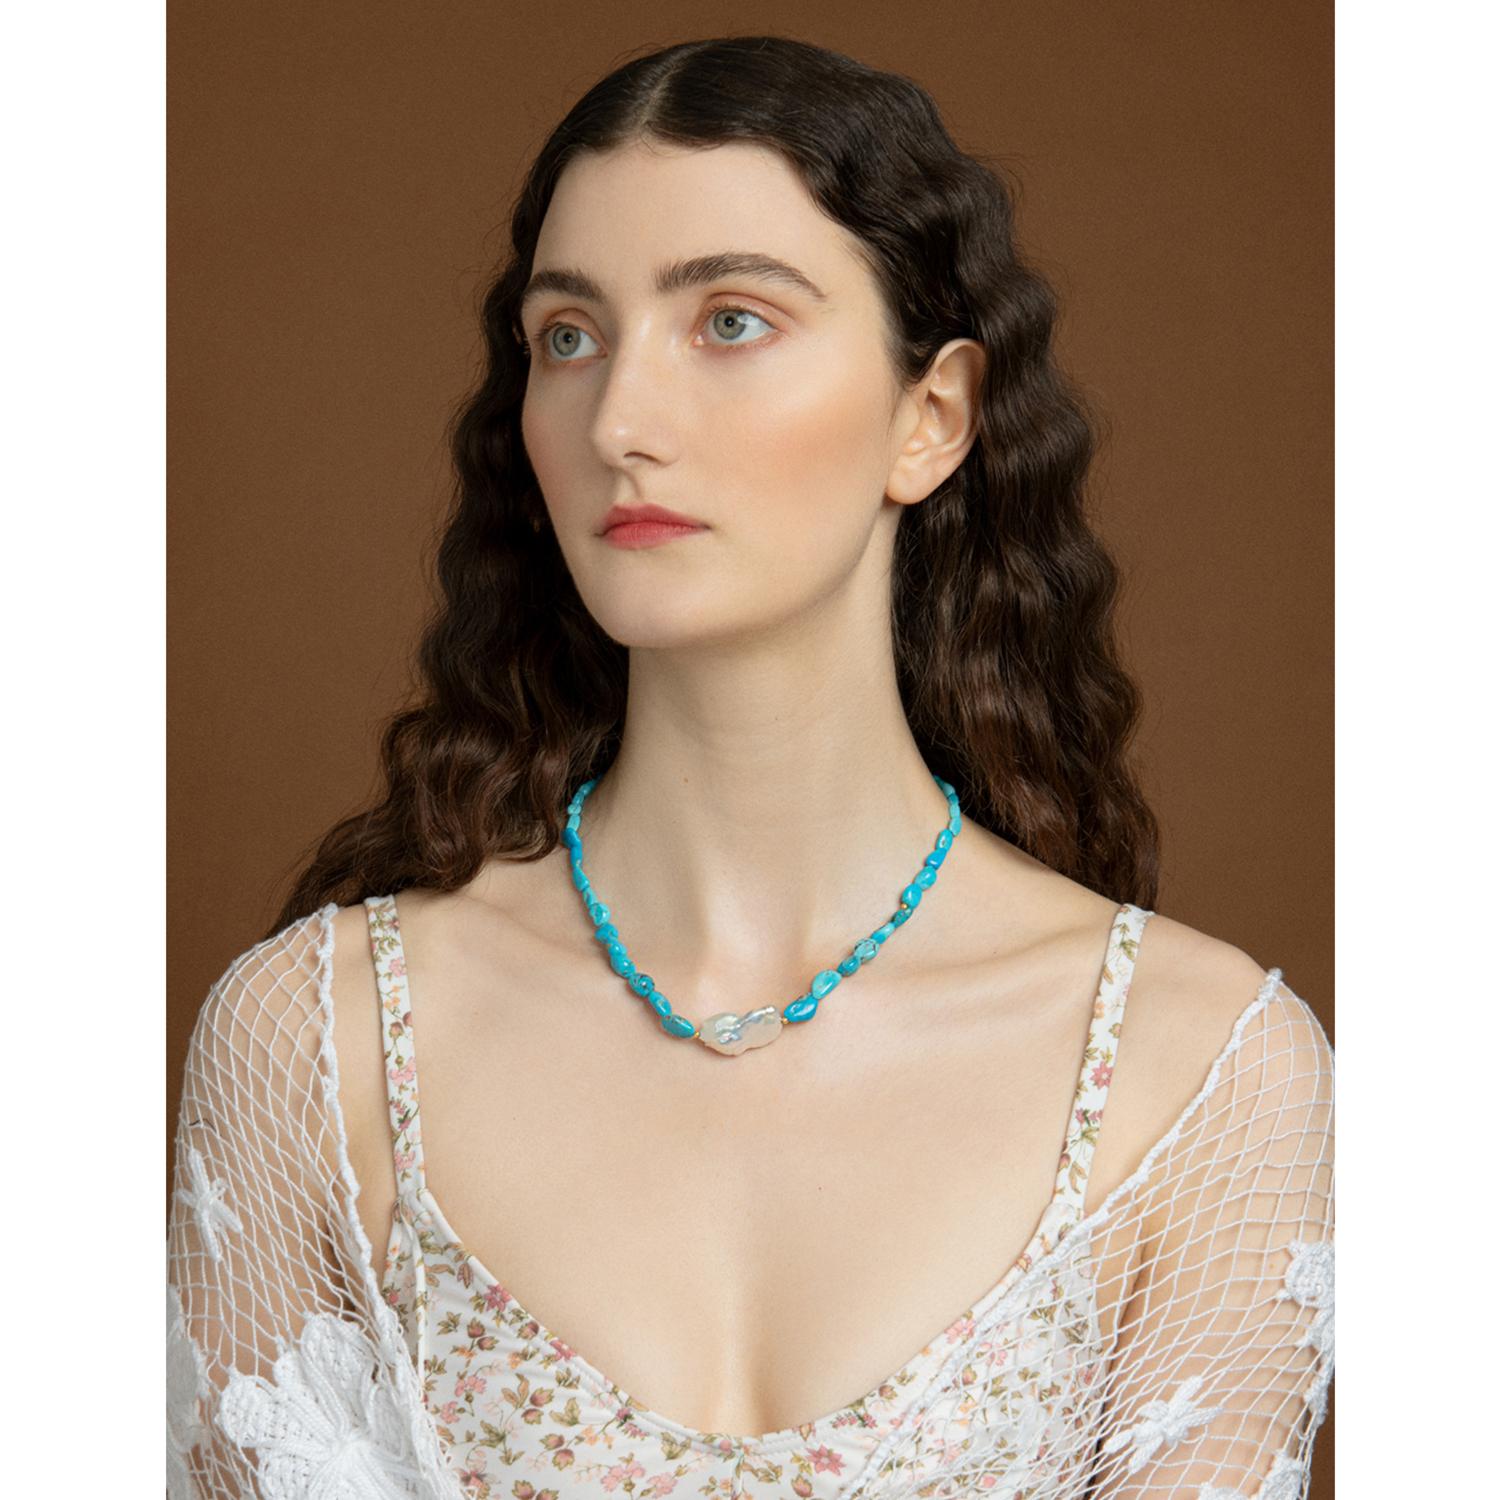 Indulge yourself in timeless elegance with this Azzurra necklace by Vintouch Jewels. Handmade from 18-karat gold, this necklace is strung with turquoise beads, each unique in its own way. At the center is a glossy baroque pearl, which symbolizes